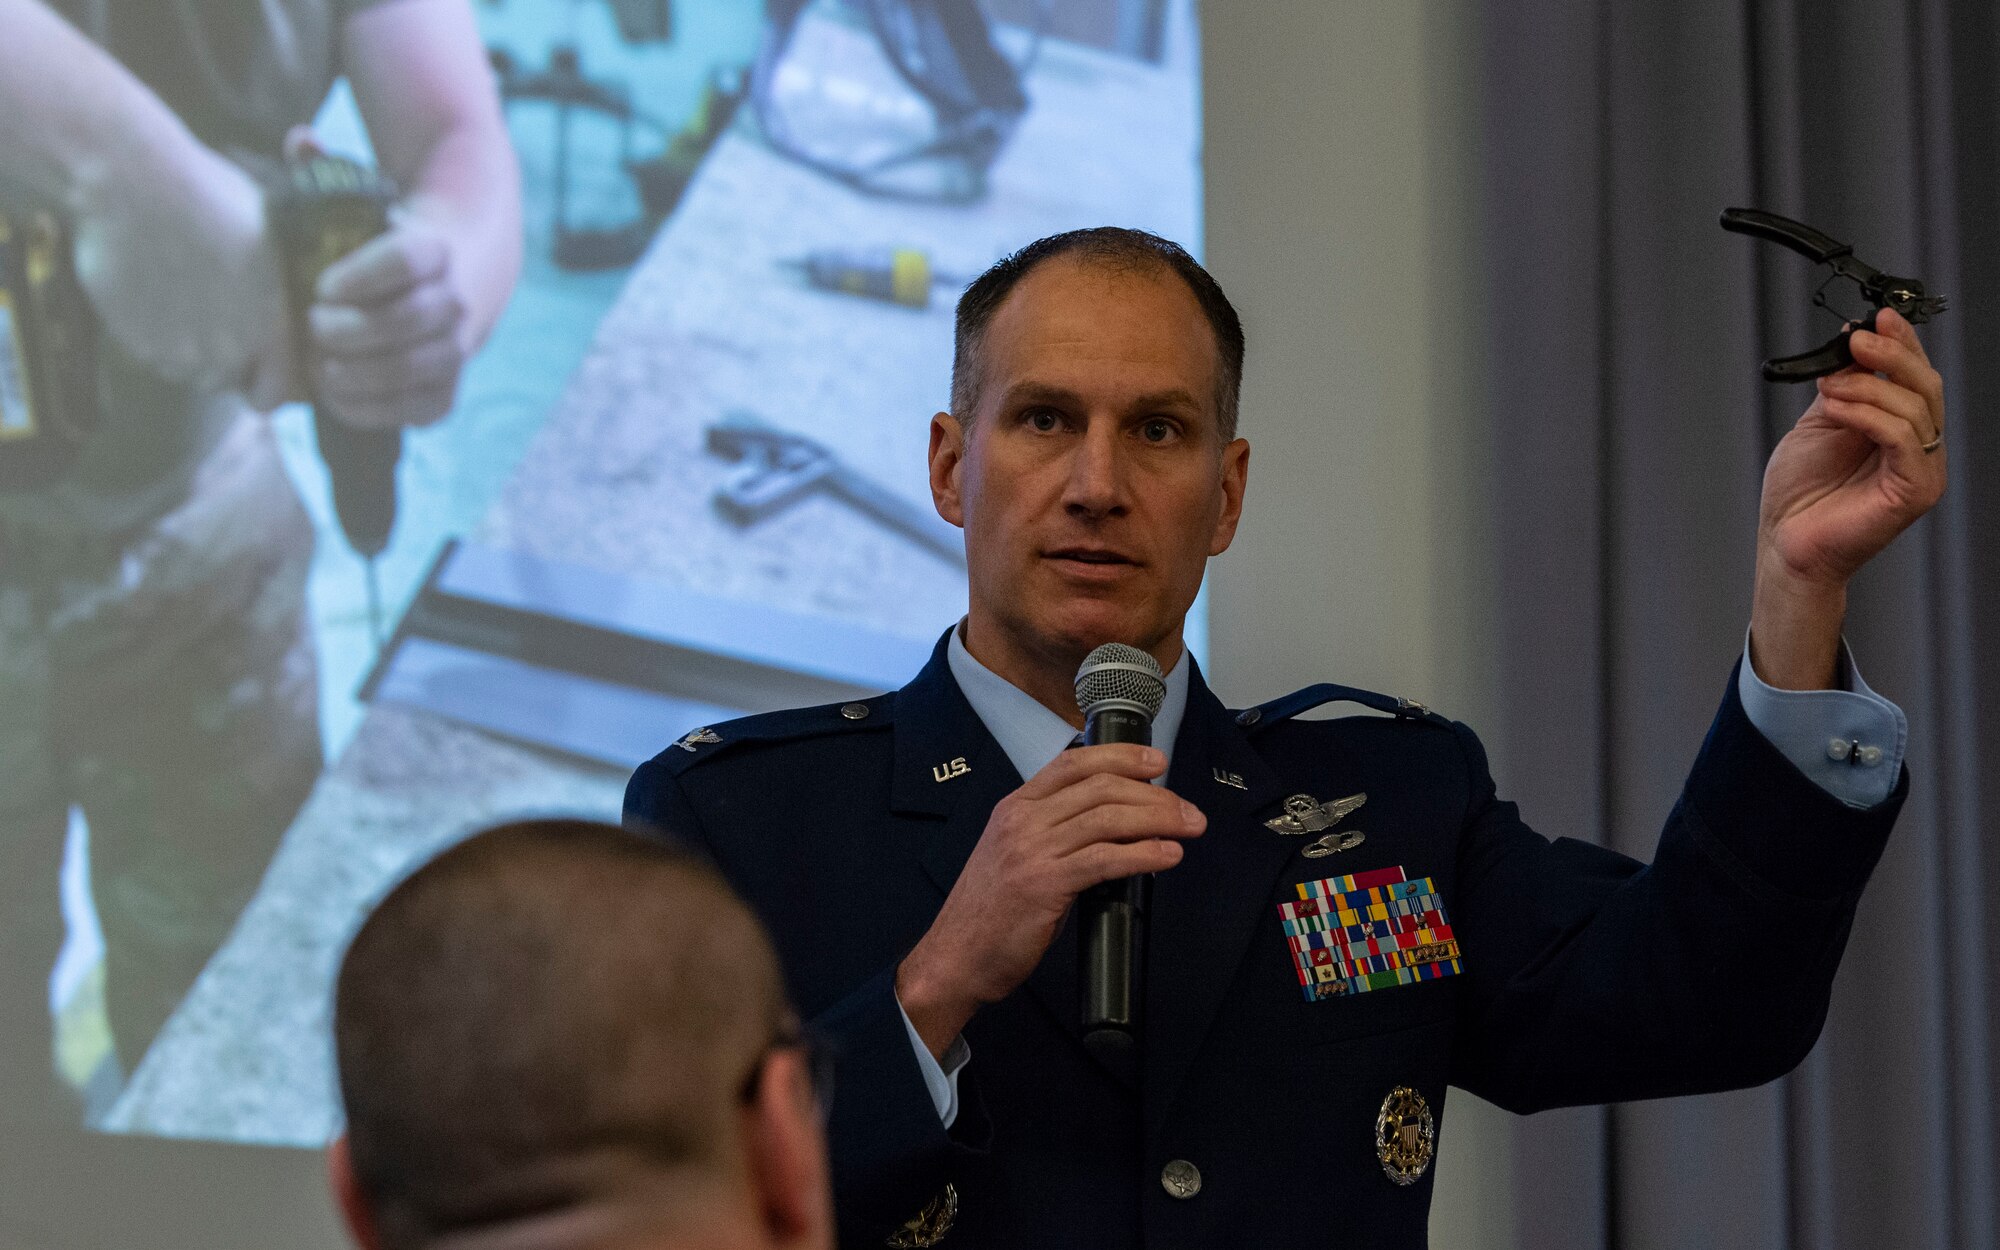 Col. Matt Husemann, 436th Airlift Wing commander, holds up a pair of pliers during the 2022 State of the Base briefing at The Landings on Dover Air Force Base, Delaware, Nov. 21, 2022. The pliers were fabricated at the Bedrock Innovation Lab by Team Dover Airmen. (U.S. Air Force photo by Roland Balik)